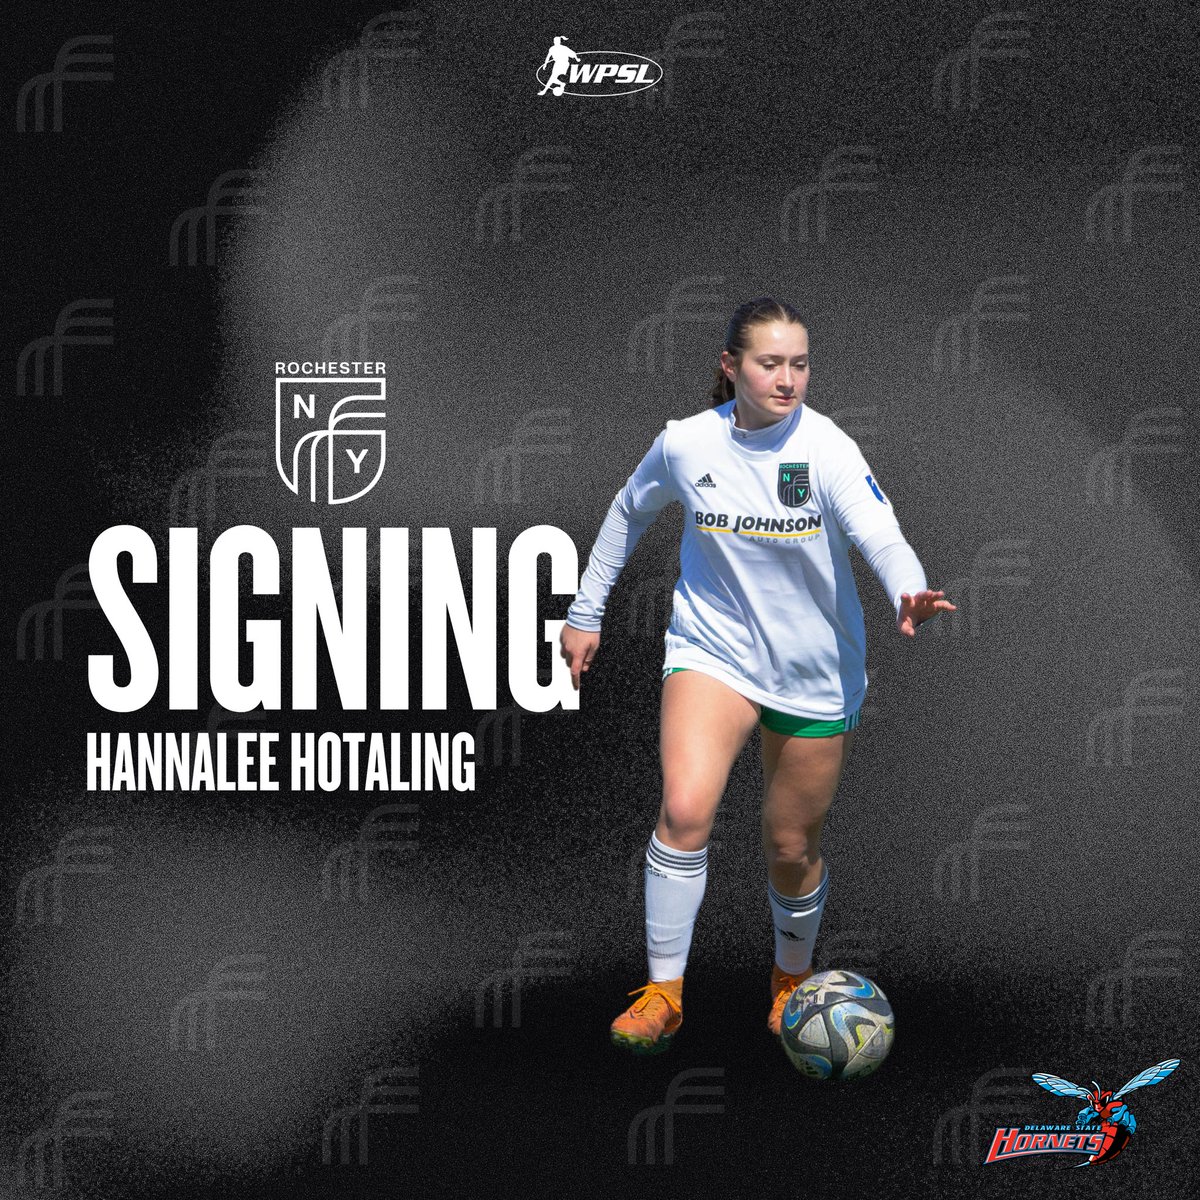 New Signing Alert 🤩 

Hannalee Hotaling | RNY FC Girls Academy -> Delaware State 

#rnyfcwpsl #WPSL #signing #soccer #womenssoccer #BelieveToAchieve